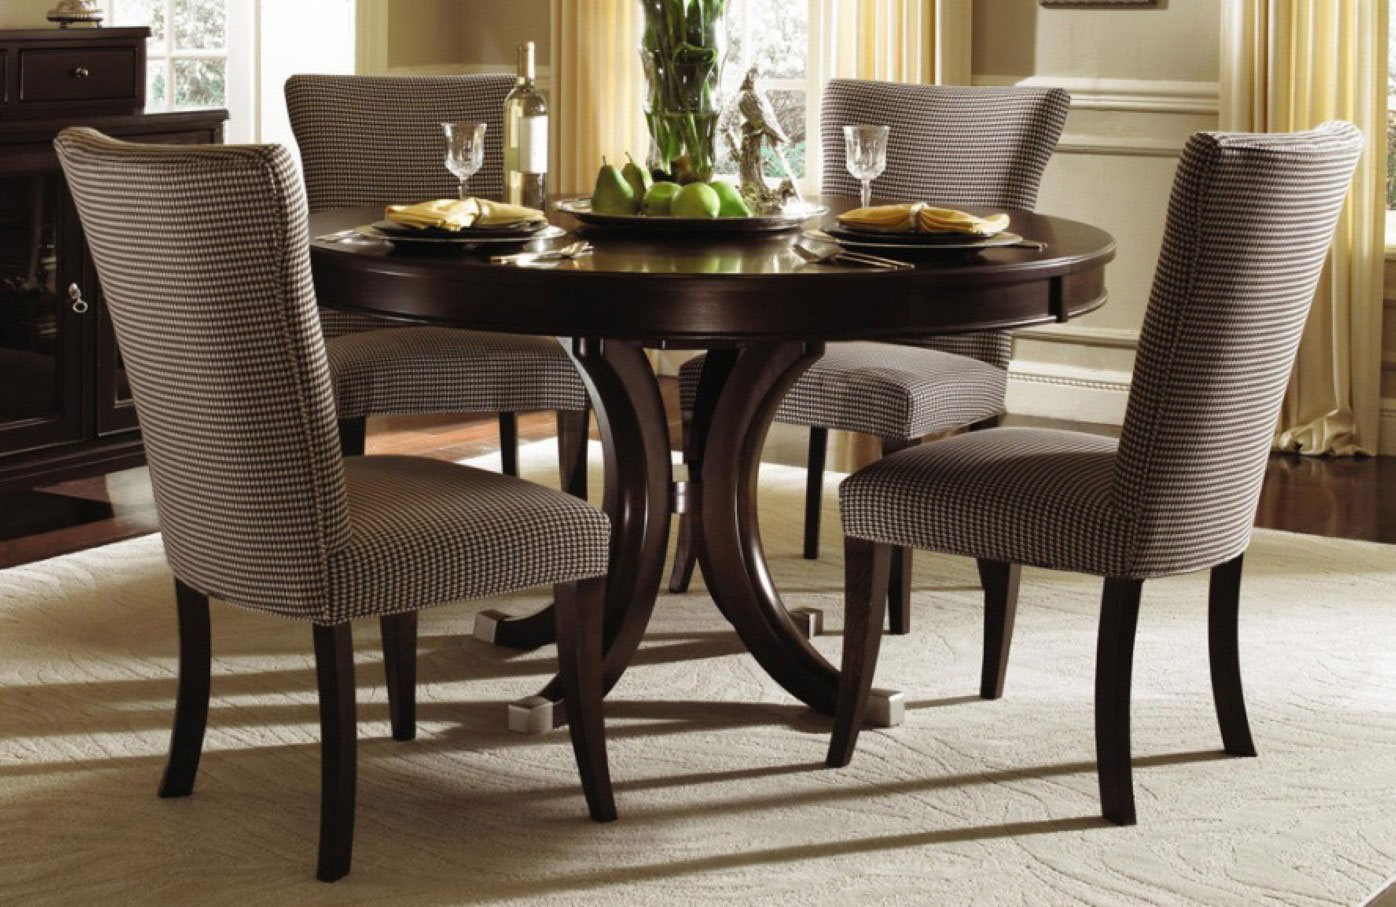 Round Dining Curved Cool Round Dining Table With Curved Wood Legs And Cozy Gray Upholstered Chairs Plus Large Area Rug Idea Dining Room  Round Dining Tables Creating Eternal Relationship With Your Family 